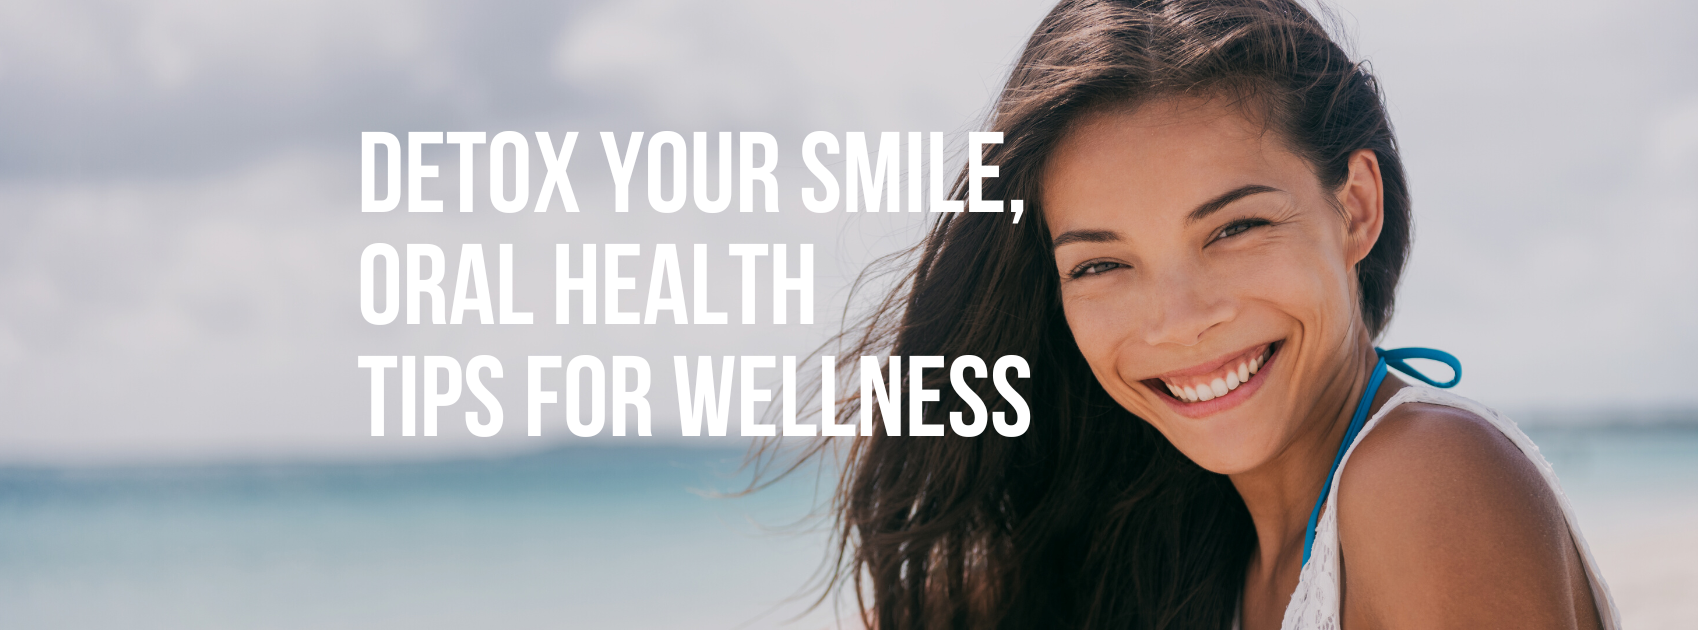 Detox Your Smile - Oral Health Tips for Wellness